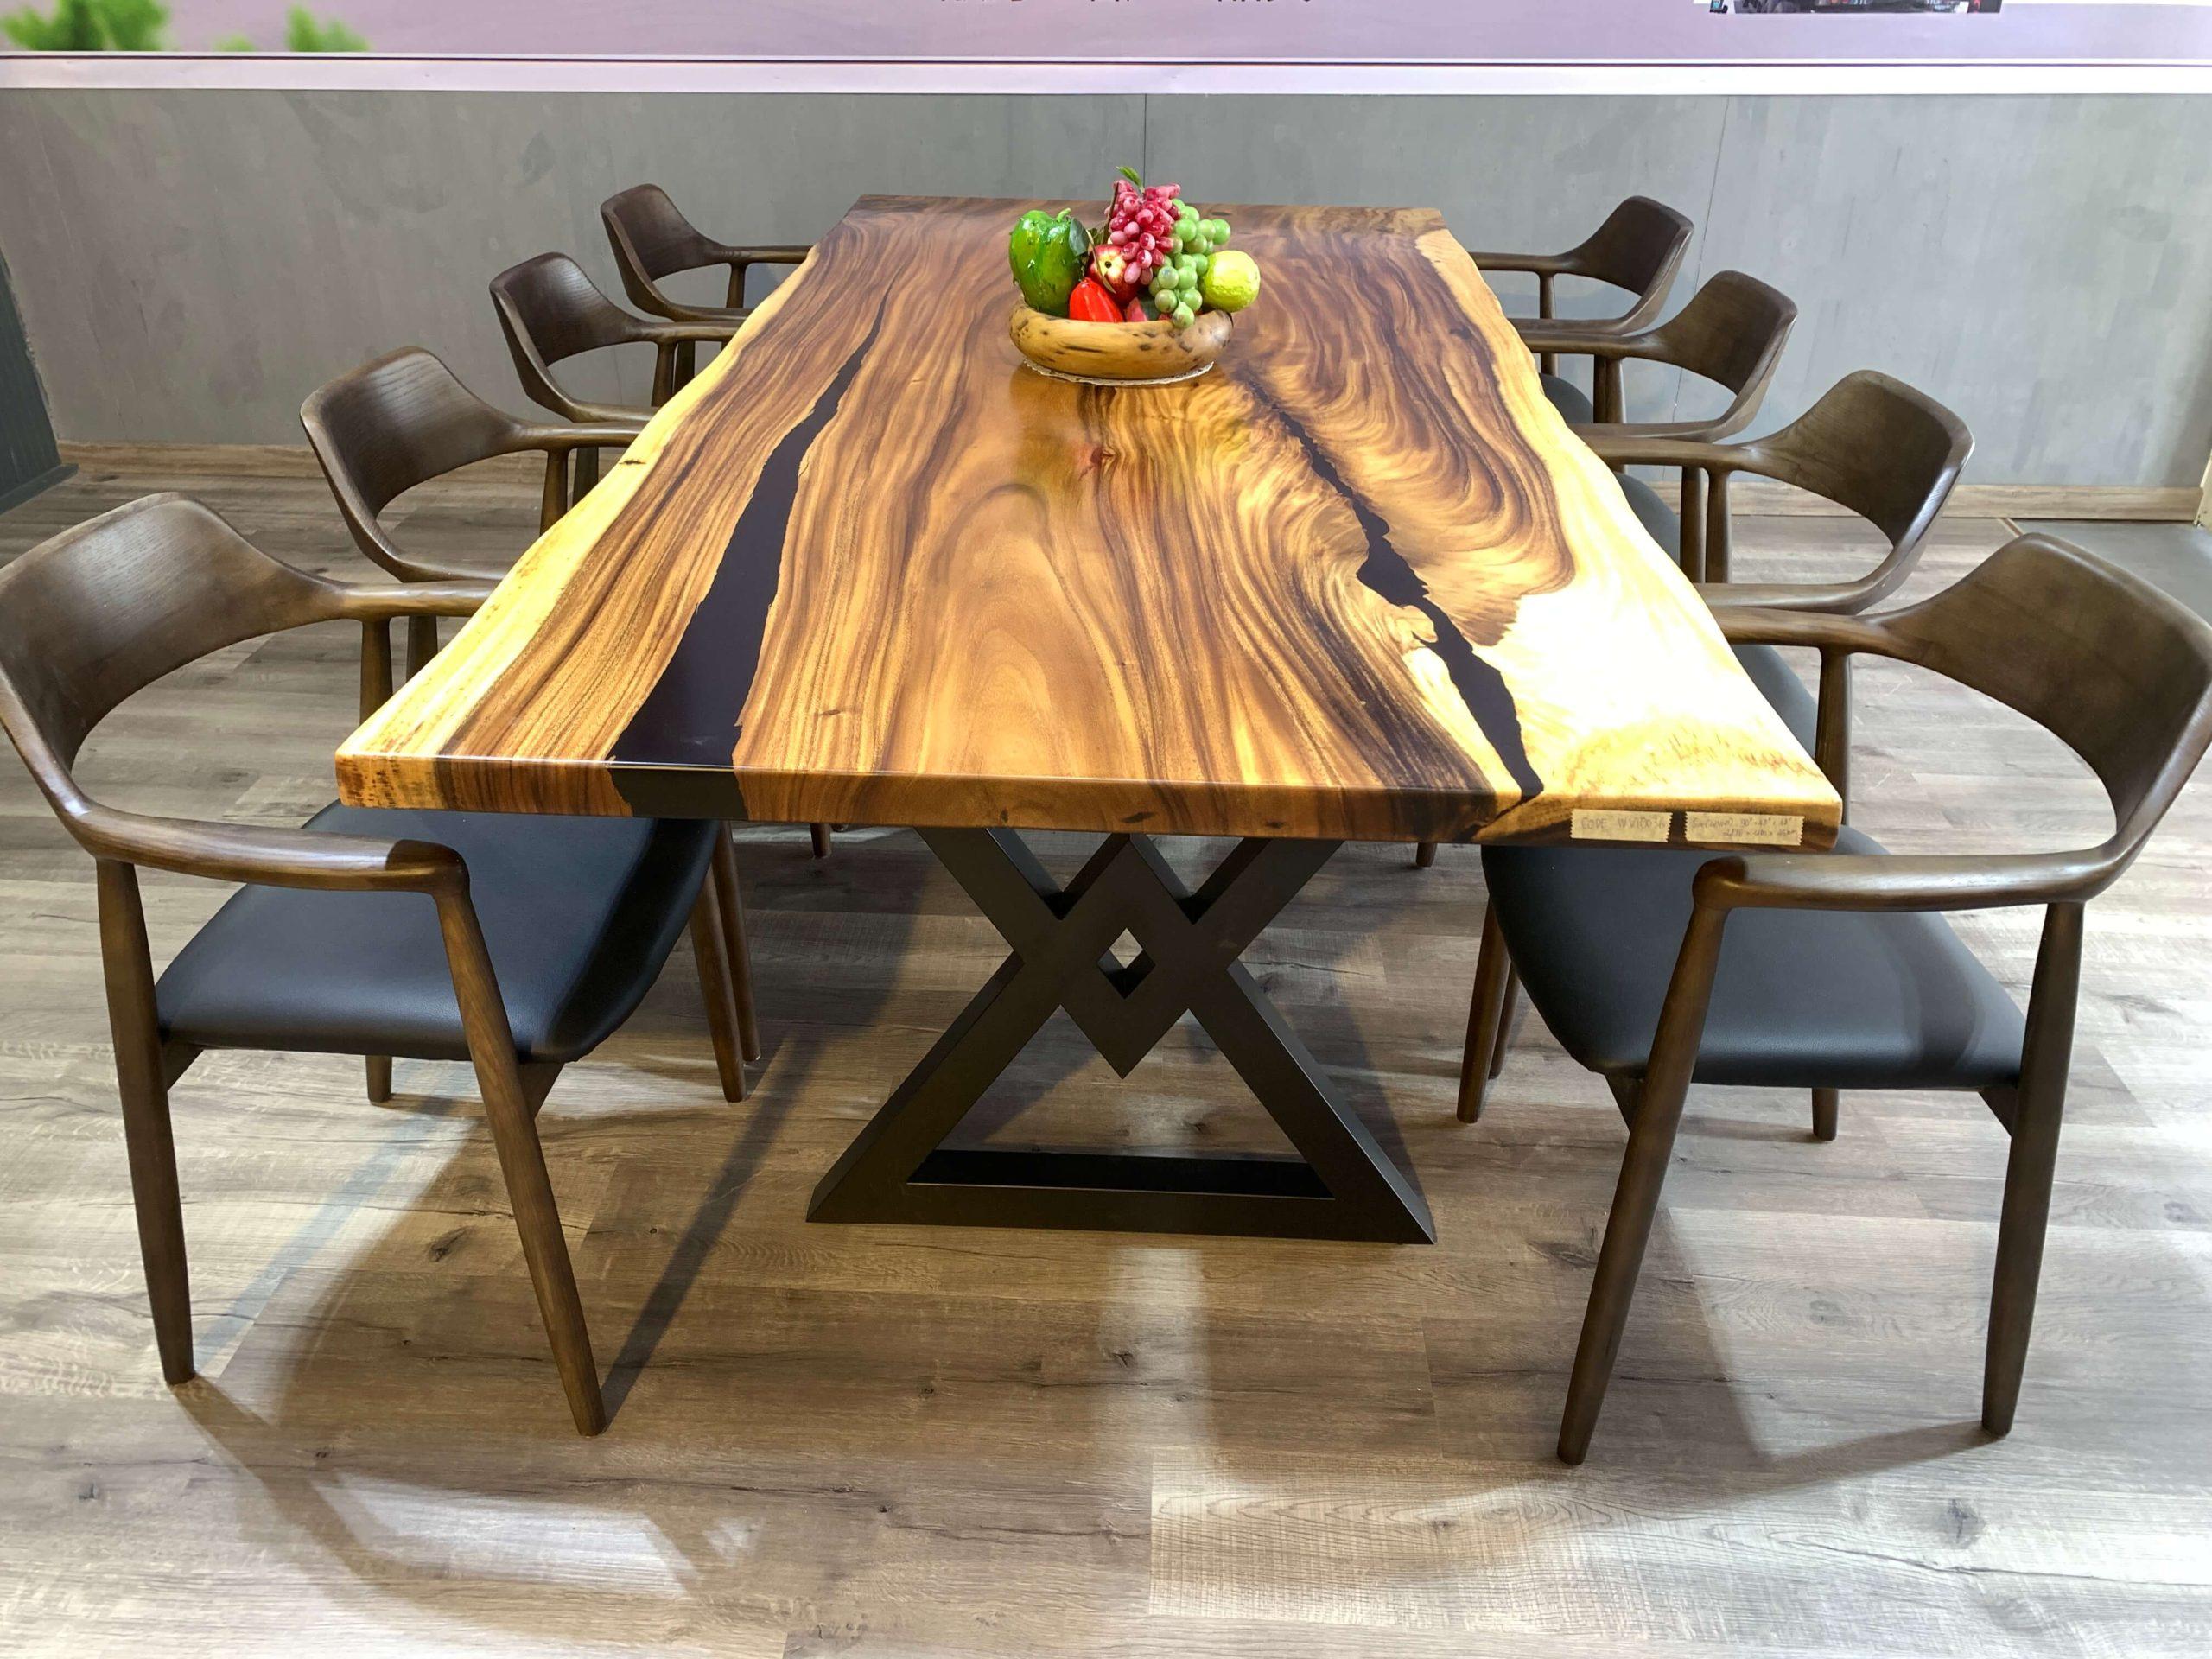 Contemporary Dining Table Zambia Dining Table WVT0036-90-T WVT0036-90-T in Wood, Black 